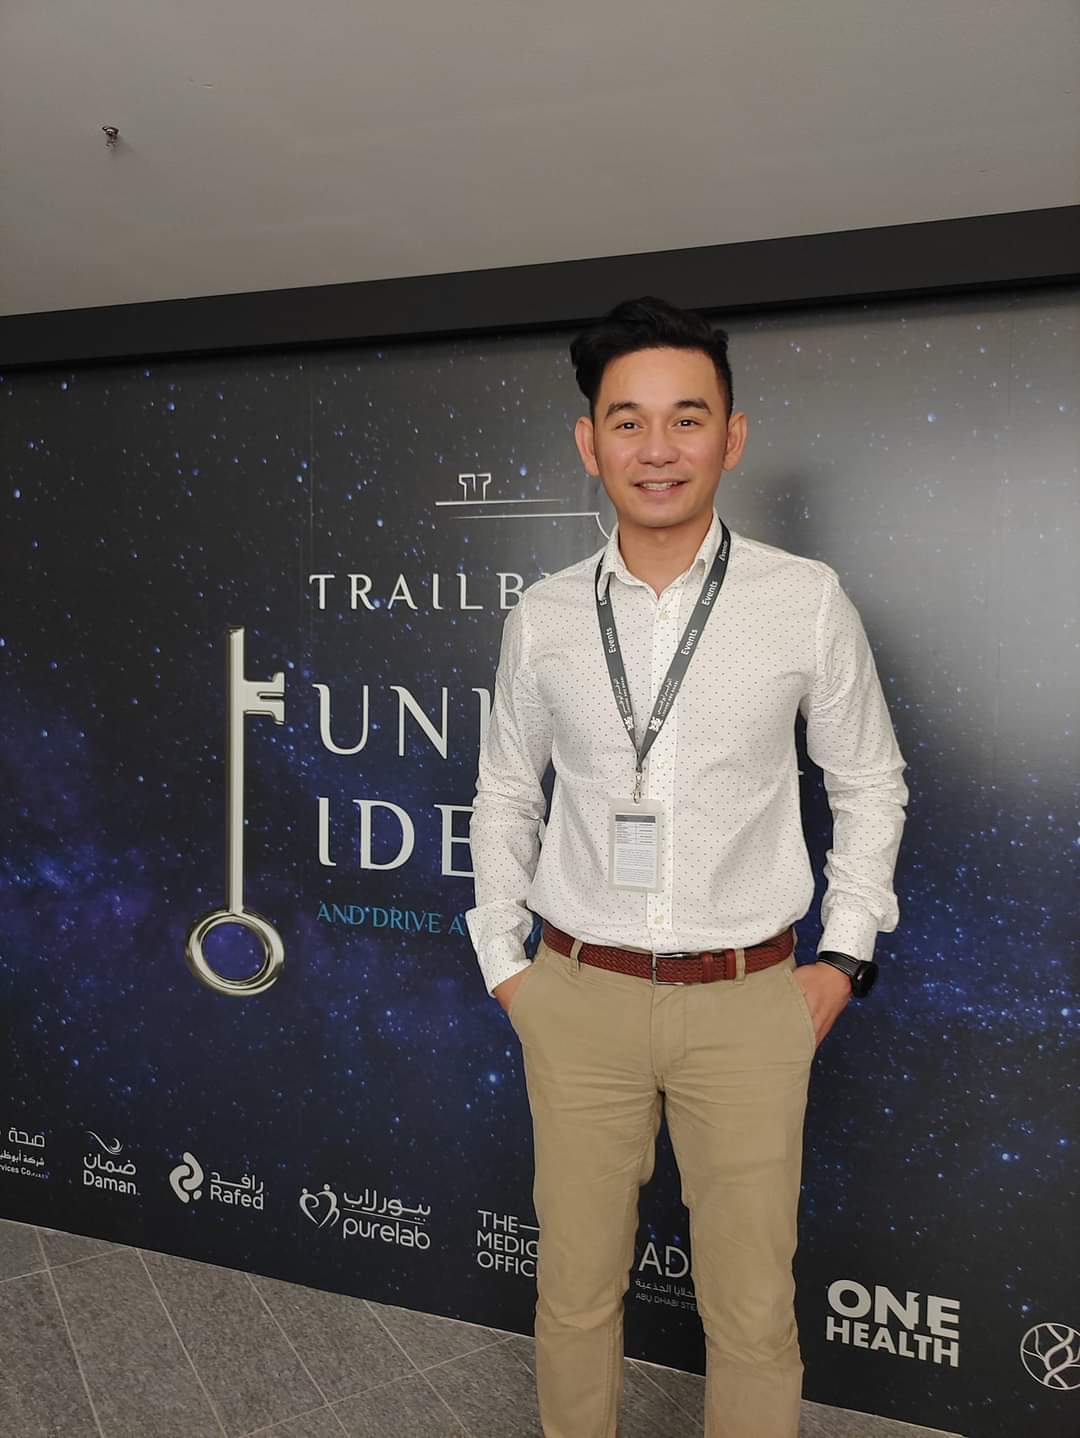 Filipino nurse creates AI-based app for cognitive decline tracking, secures  Top 15 spot in Purehealth's Trailblazers - The Filipino Times